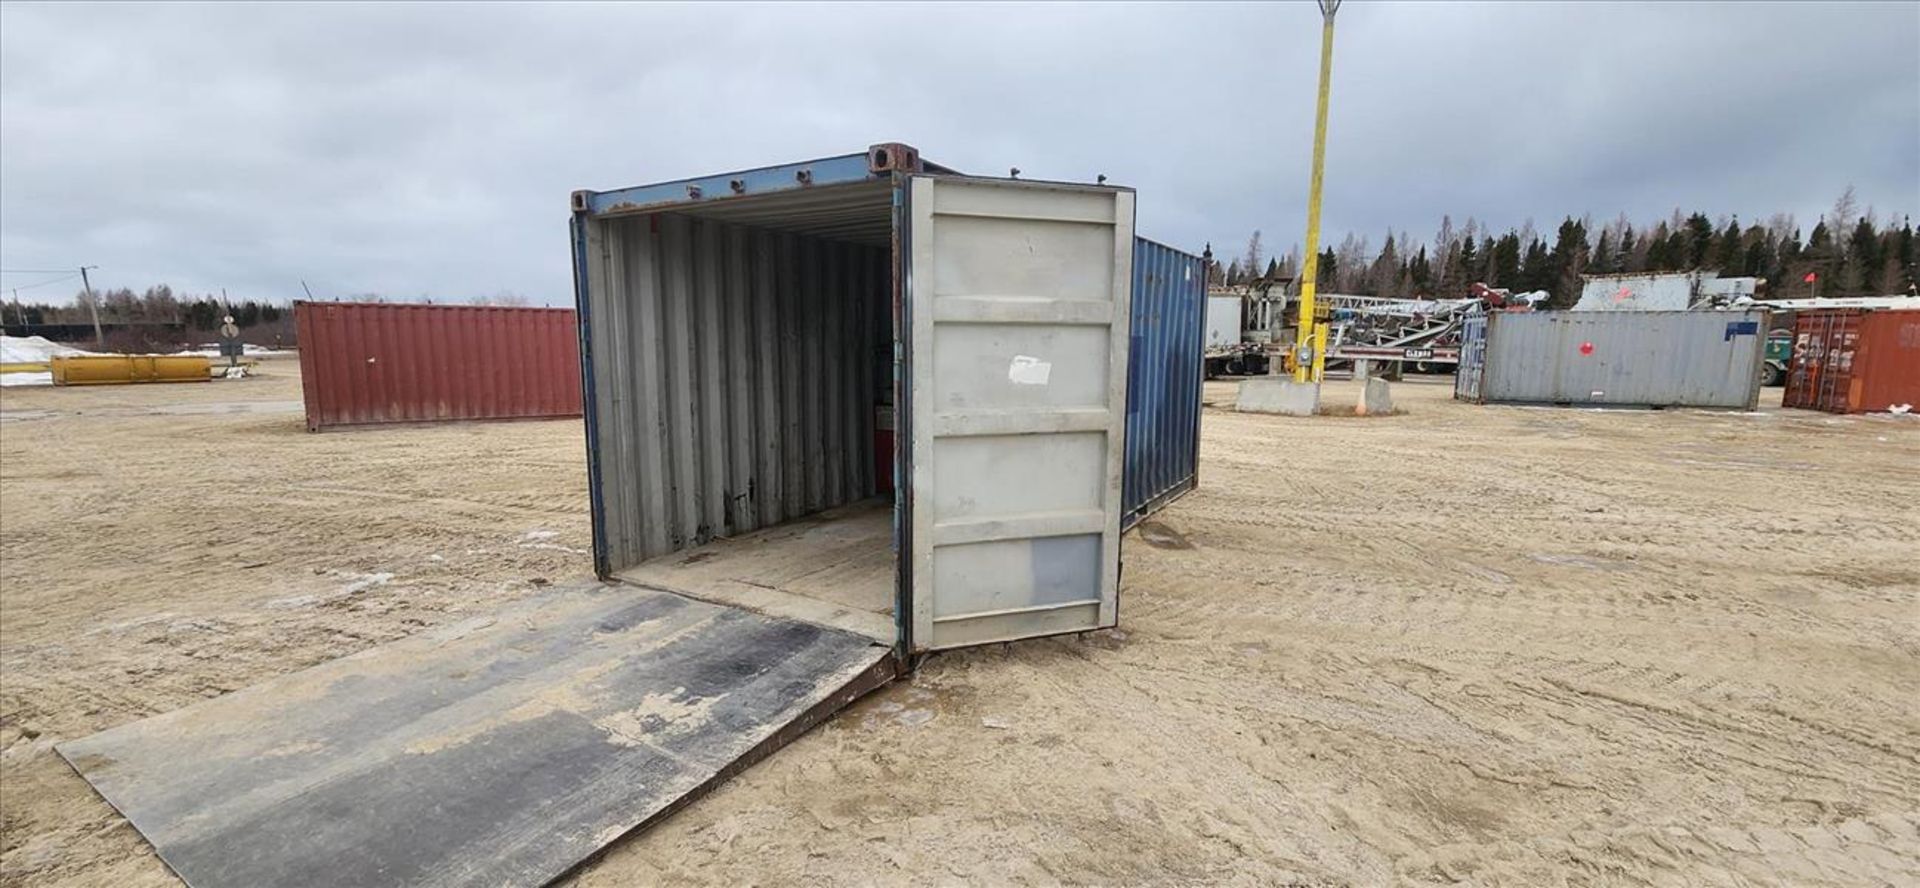 sea container, 20 ft. (delayed removal date applies) (Asset Location: Hallnor Yard) {Day 1} [TAG